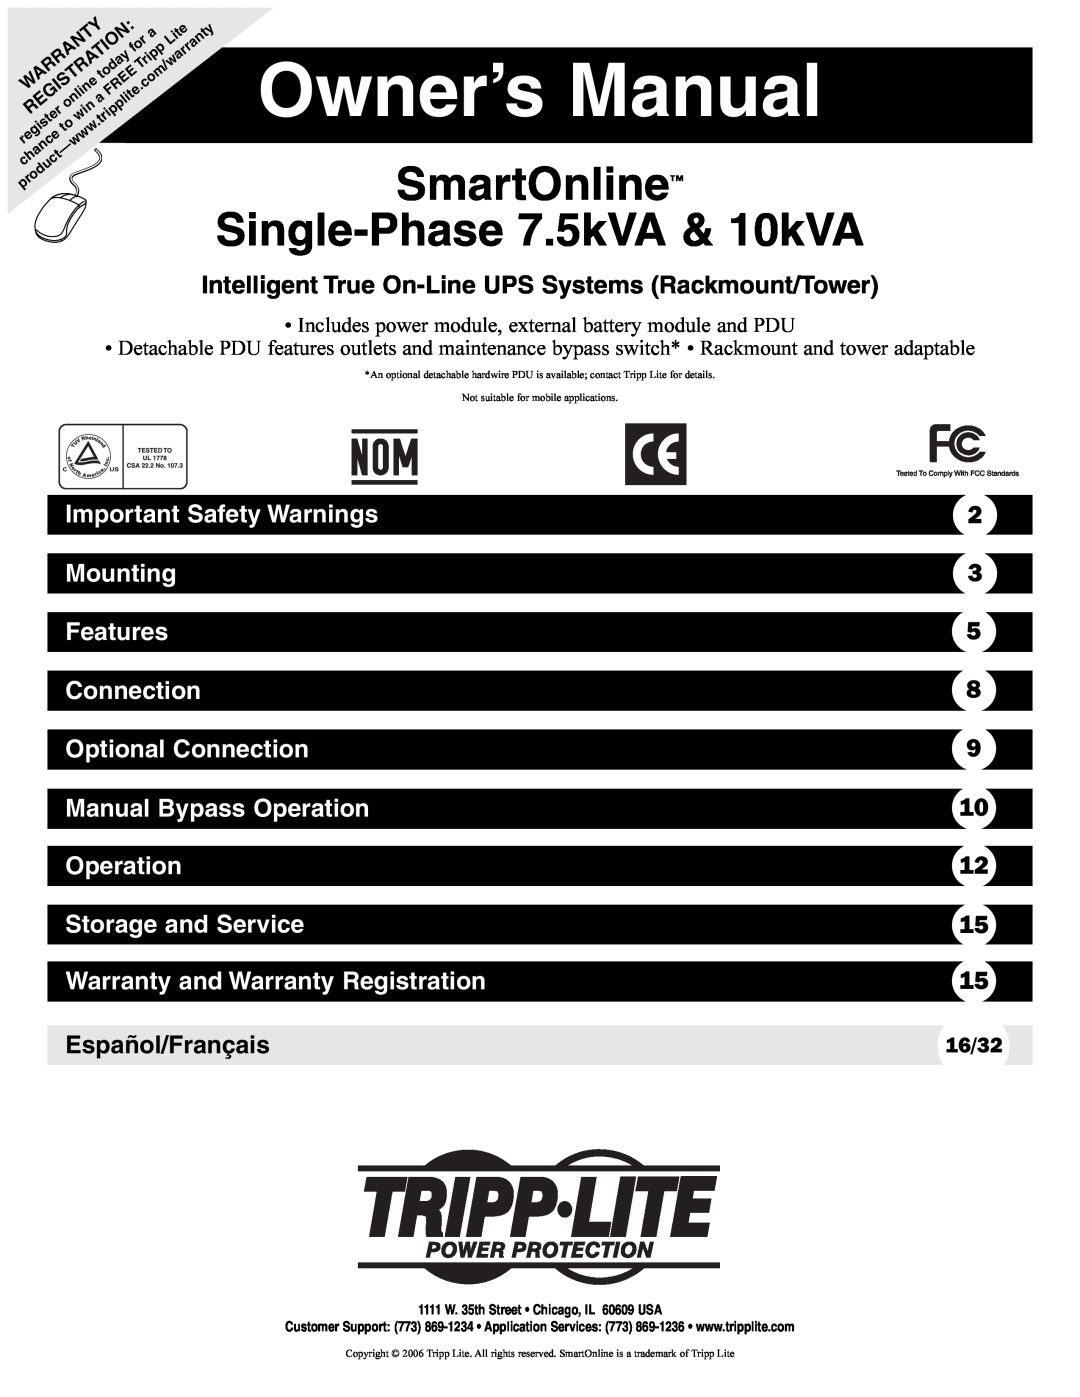 Tripp Lite Single-Phase 10kVA owner manual Owner’s Manual, SmartOnline Single-Phase 7.5kVA & 10kVA, Mounting, Features 